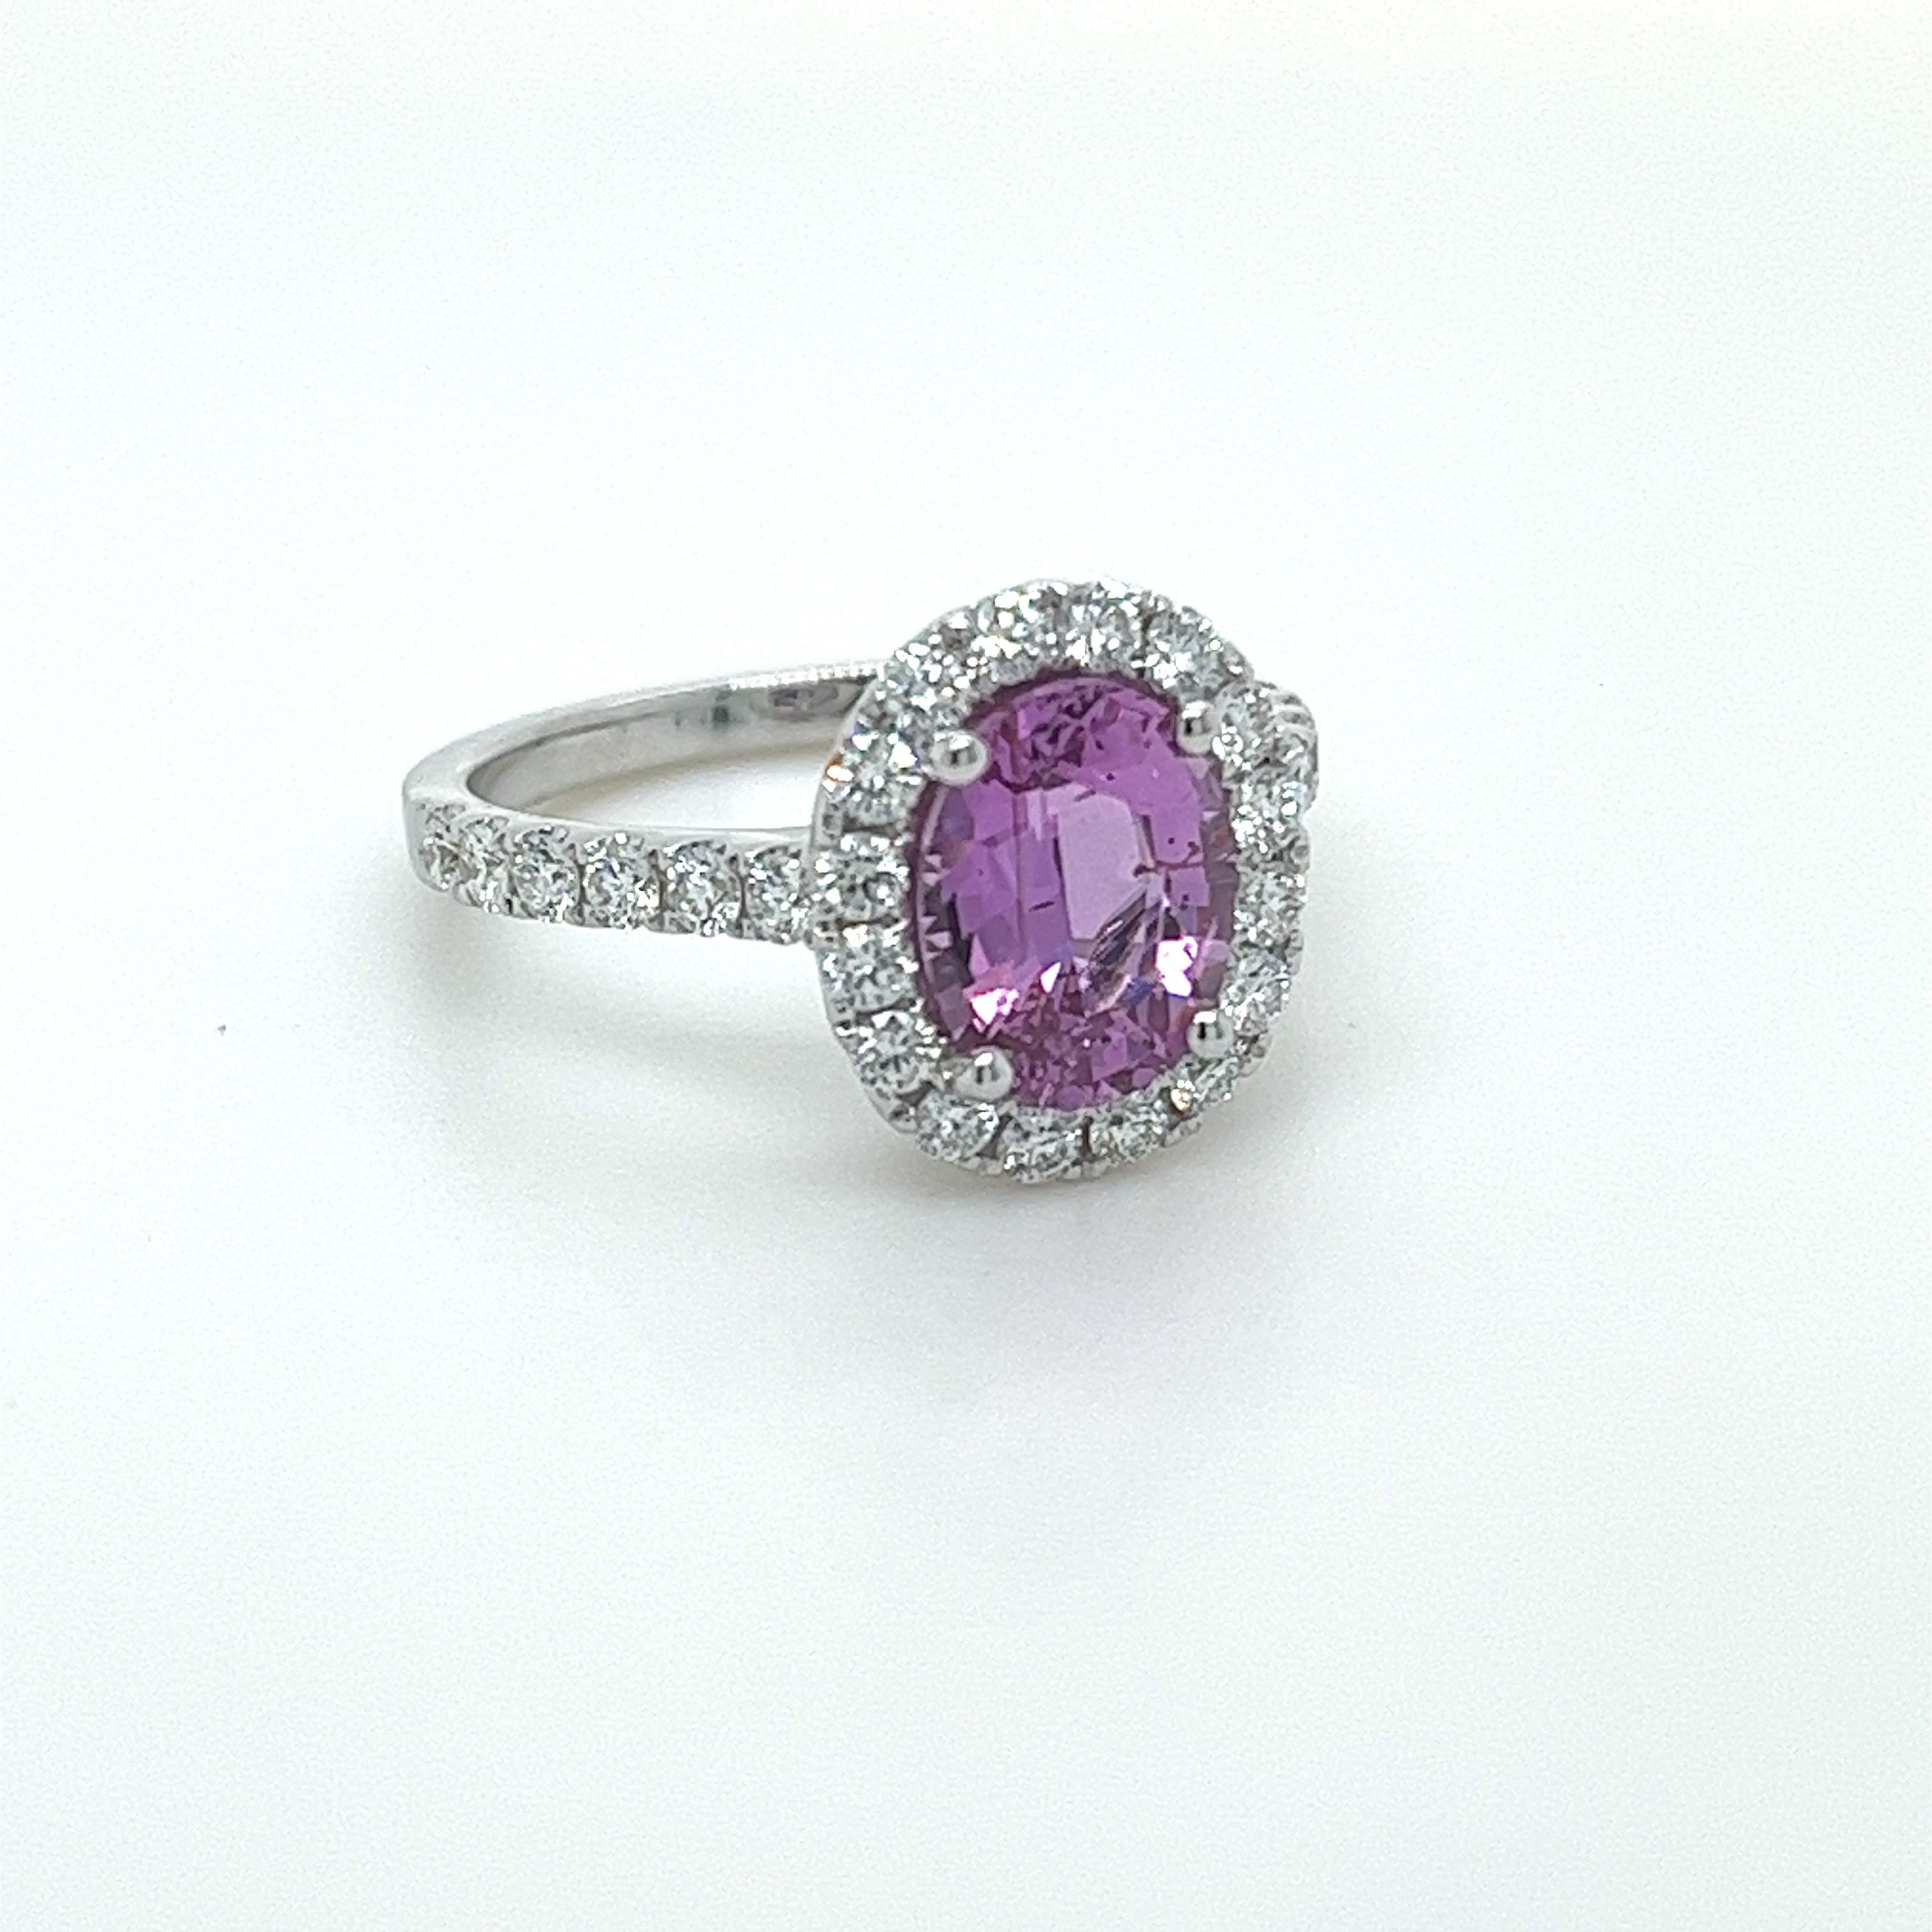 No Heat Oval Pink Sapphire weighing 2.27 carats
Measuring (8.80x6.80x4.50) mm
27 Round Diamonds weighing .67 carats
Diamond Grade: GH VS2-Si1
Set in 18k white gold ring
3.91 grams
Halo style ring